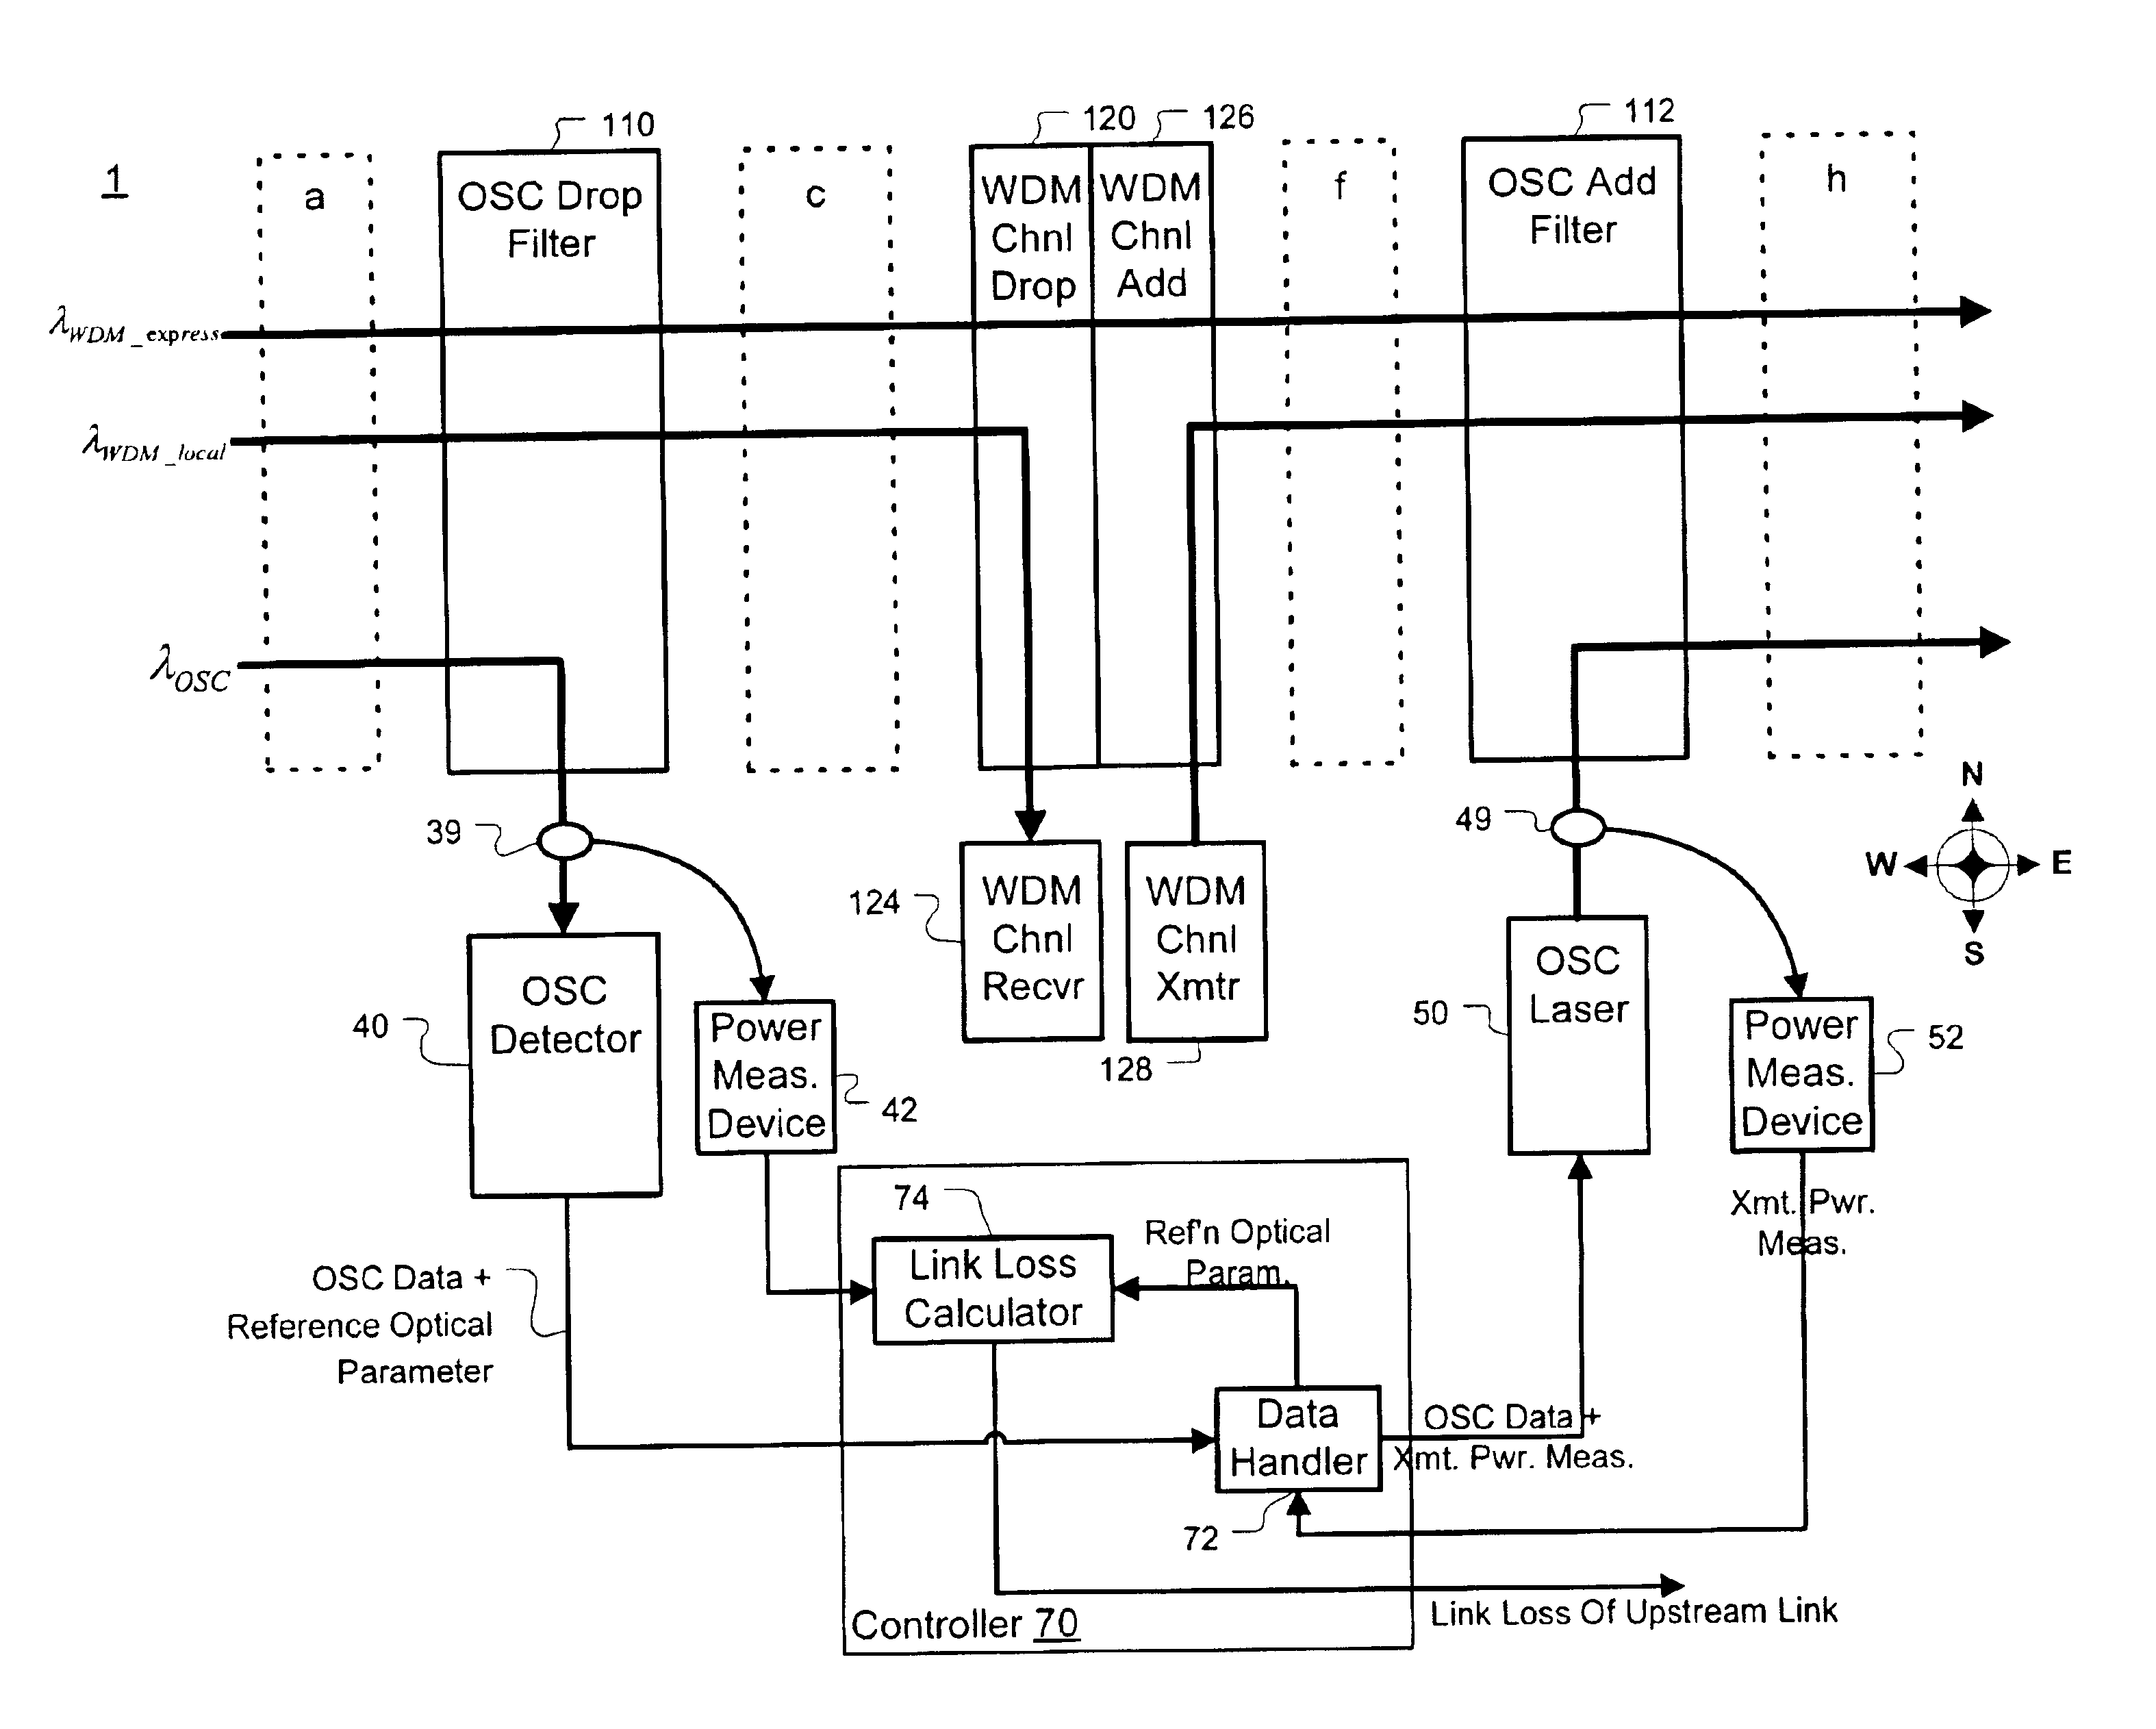 Optical supervisory channel apparatus and method for measuring optical properties